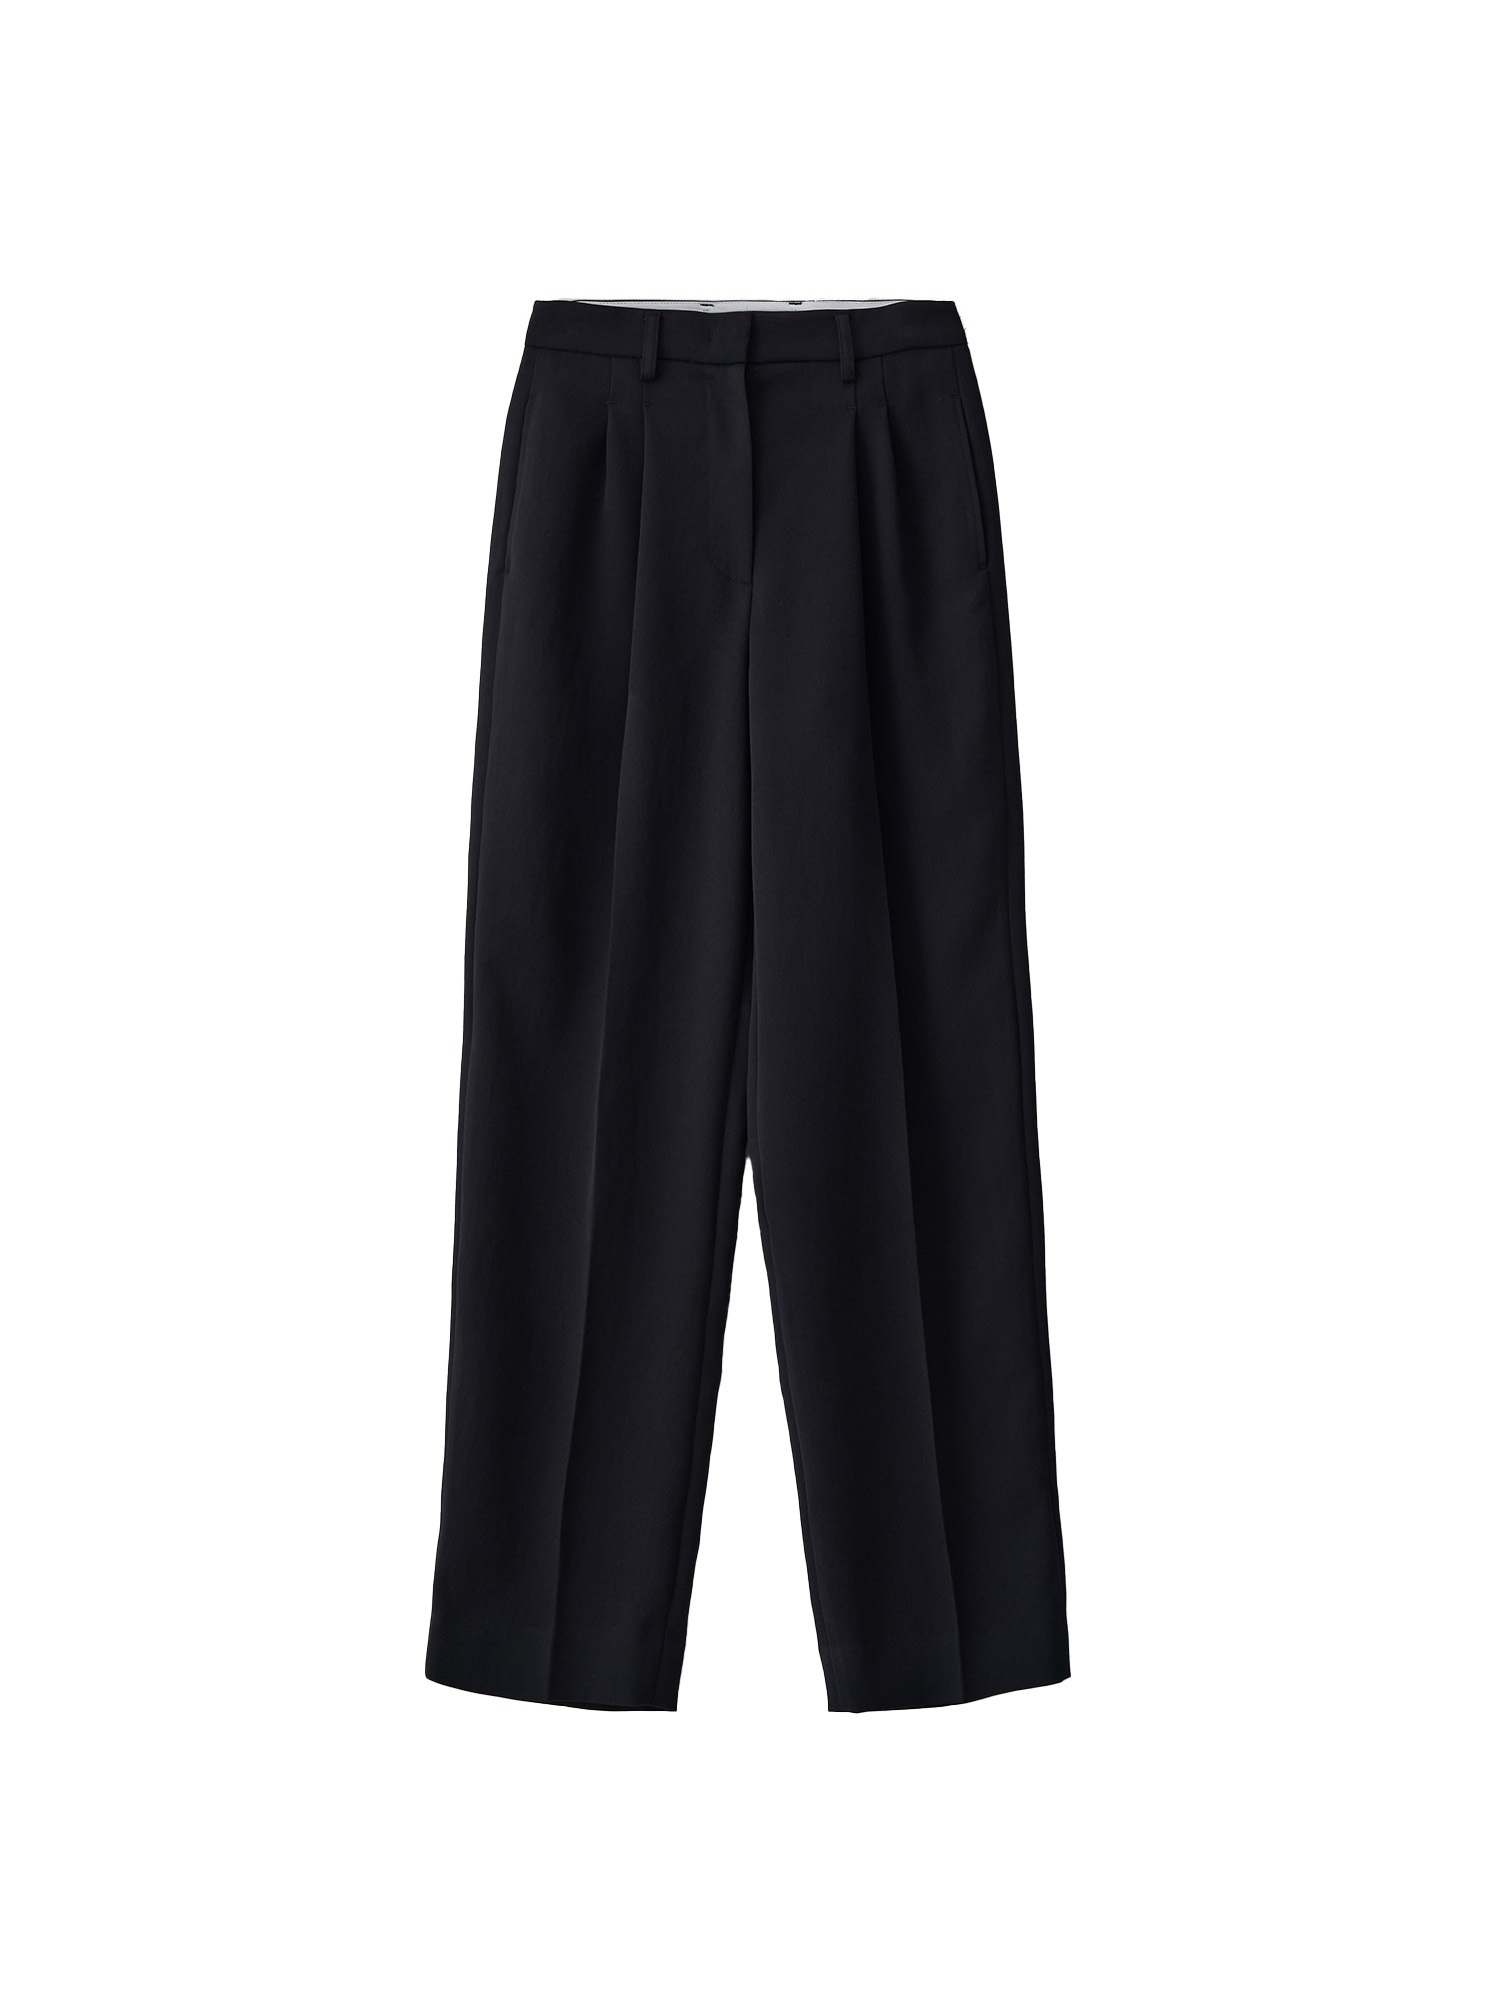 Relaxed Fit Two Tuck Pants - Black